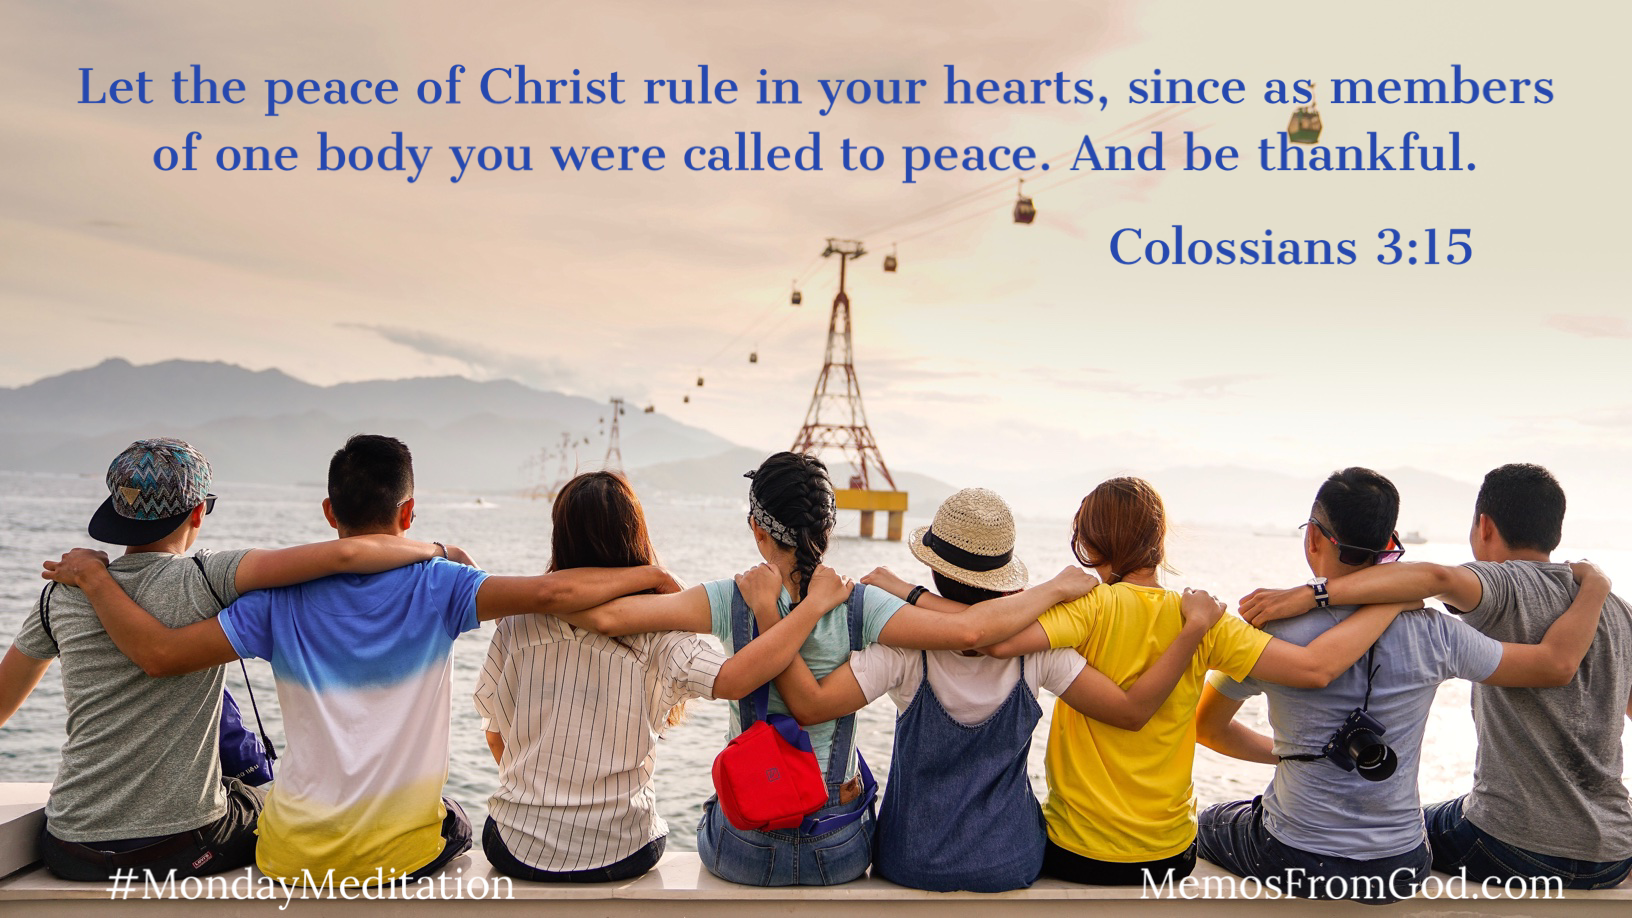 A group of eight young people sit on a bench with their arms around each other's backs. They are facing away from us, looking out over the water toward a mountain in the distance. Caption: Let the peace of Christ rule in your hearts, since as members of one body you were called to peace. And be thankful. Colossians 3:15